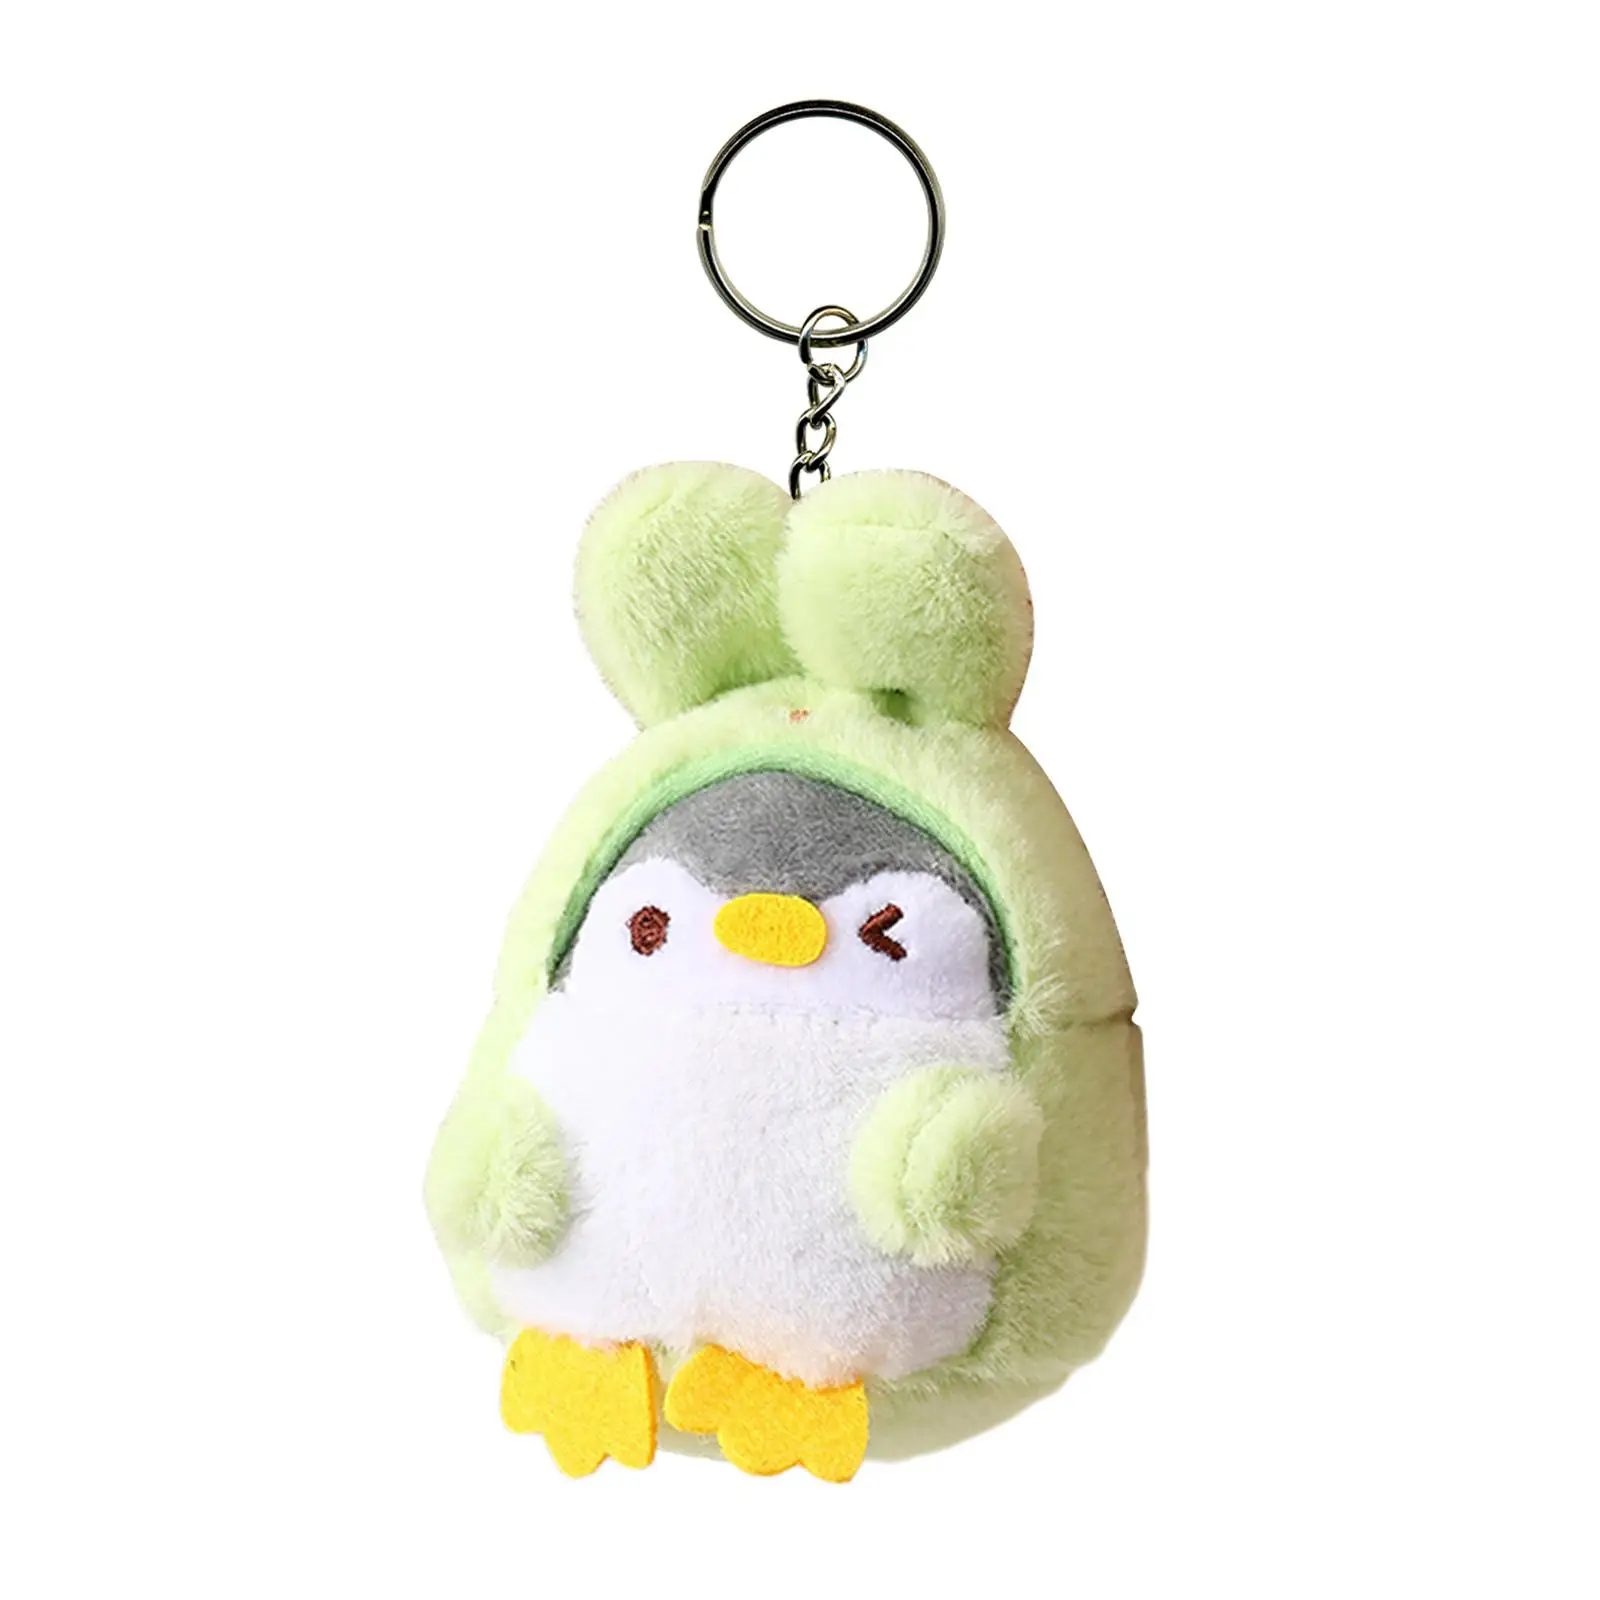 Penguin Doll Keychain Car Keychains Car Keyring for Backpack Tote Purse